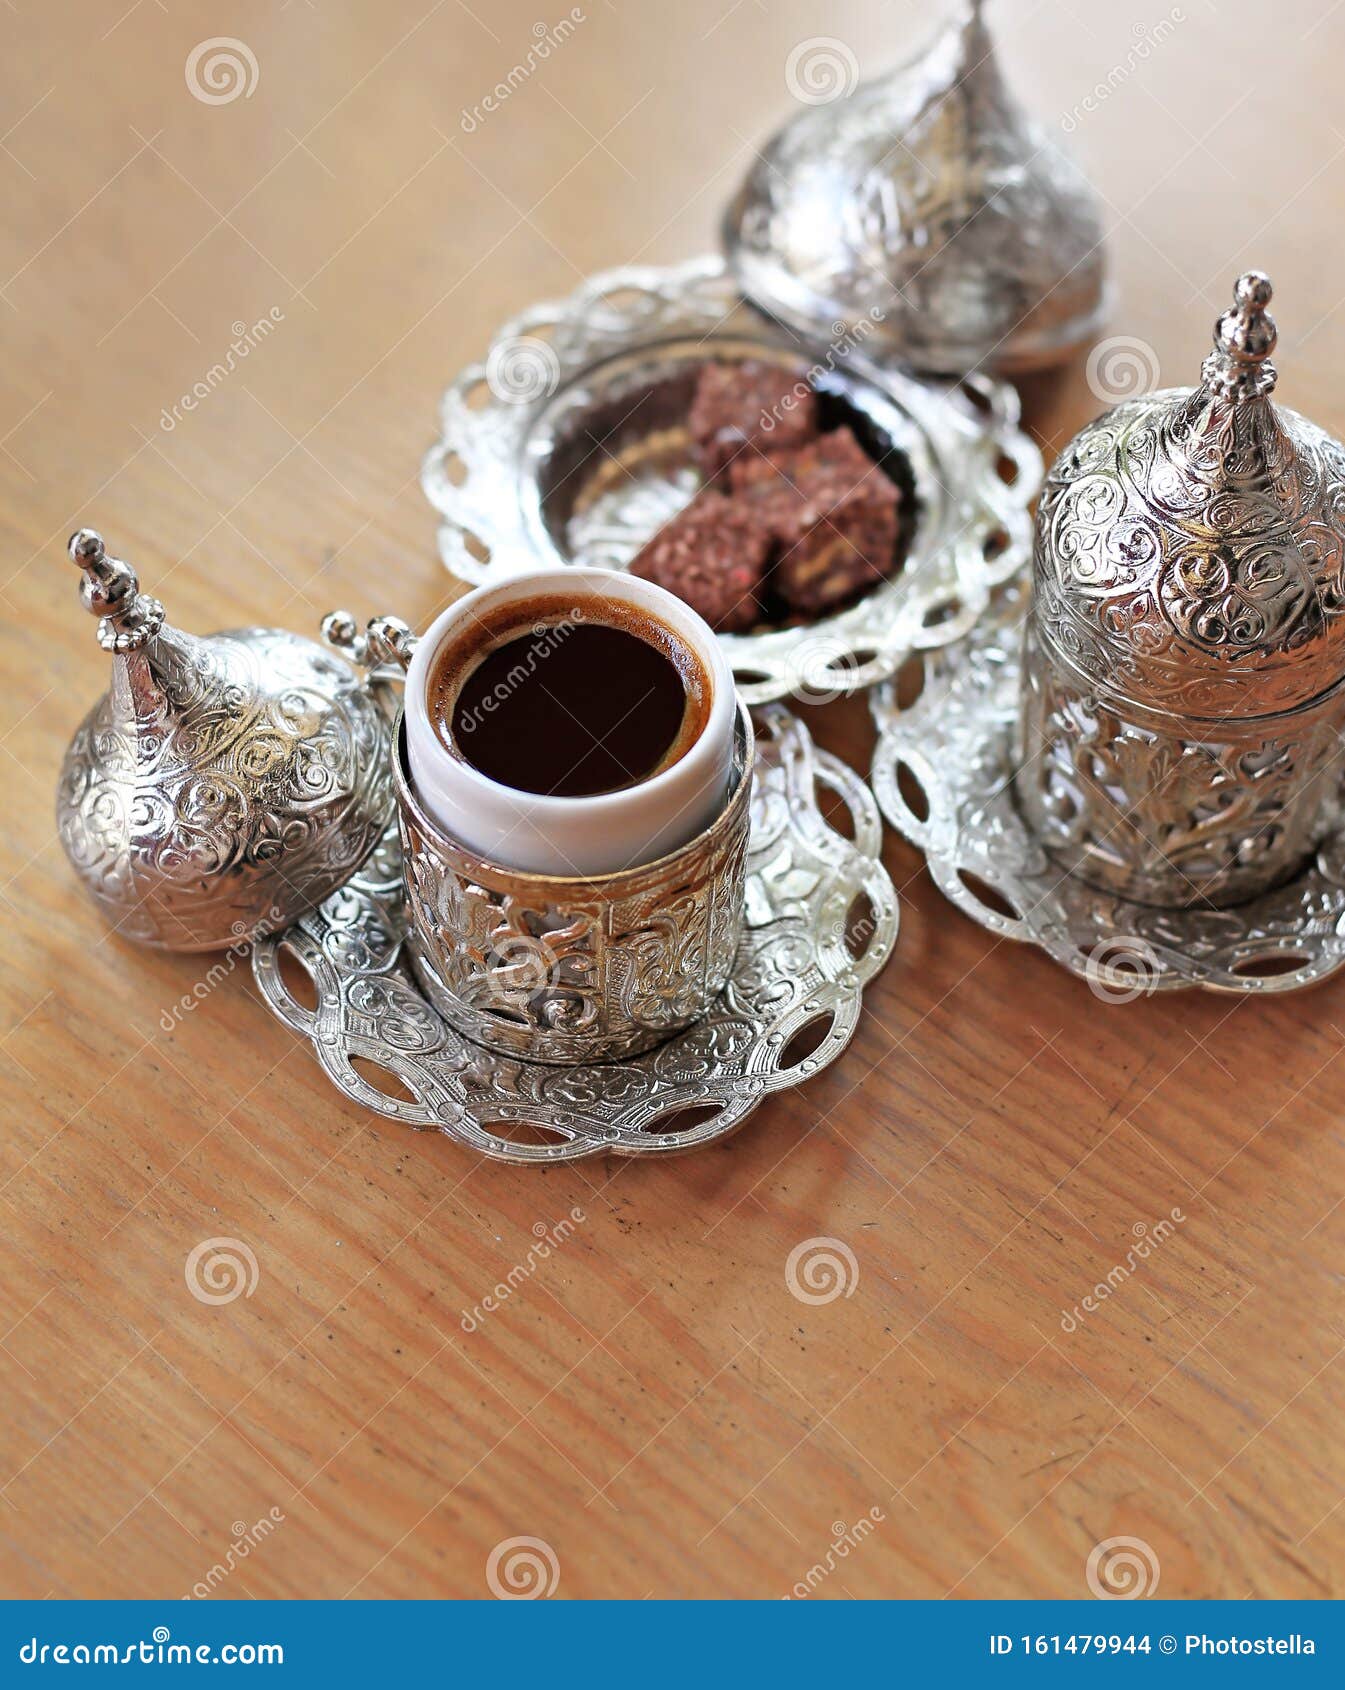 Traditional Turkish Coffee And Turkish Delight On Wooden Table Stock ...